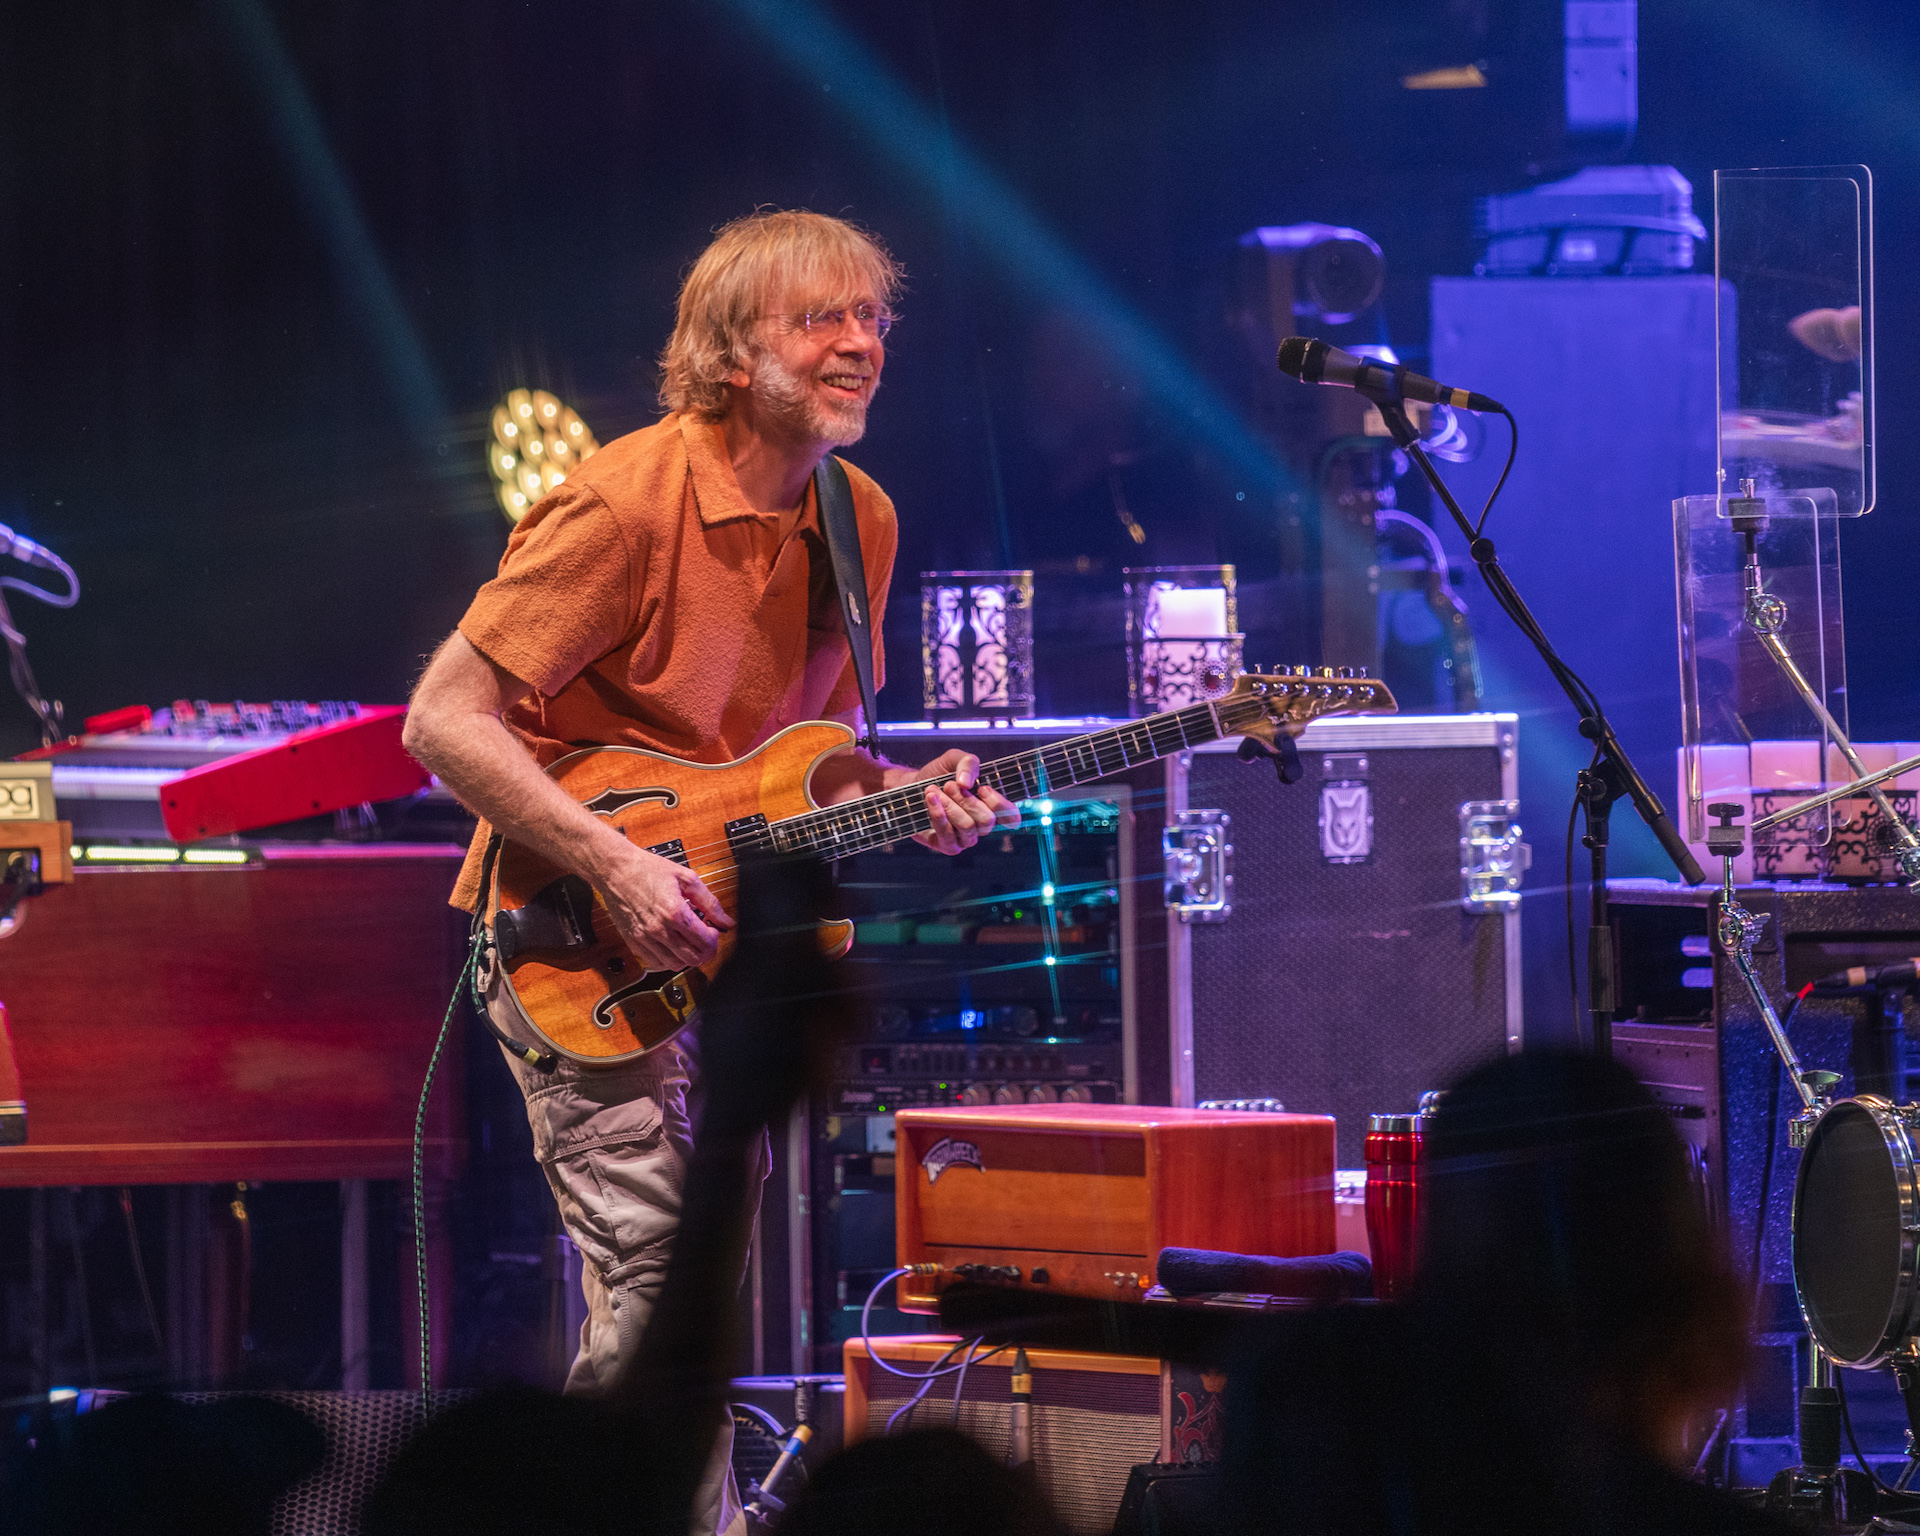 Phish's summer tour dates announced; playing The Mann for two nights